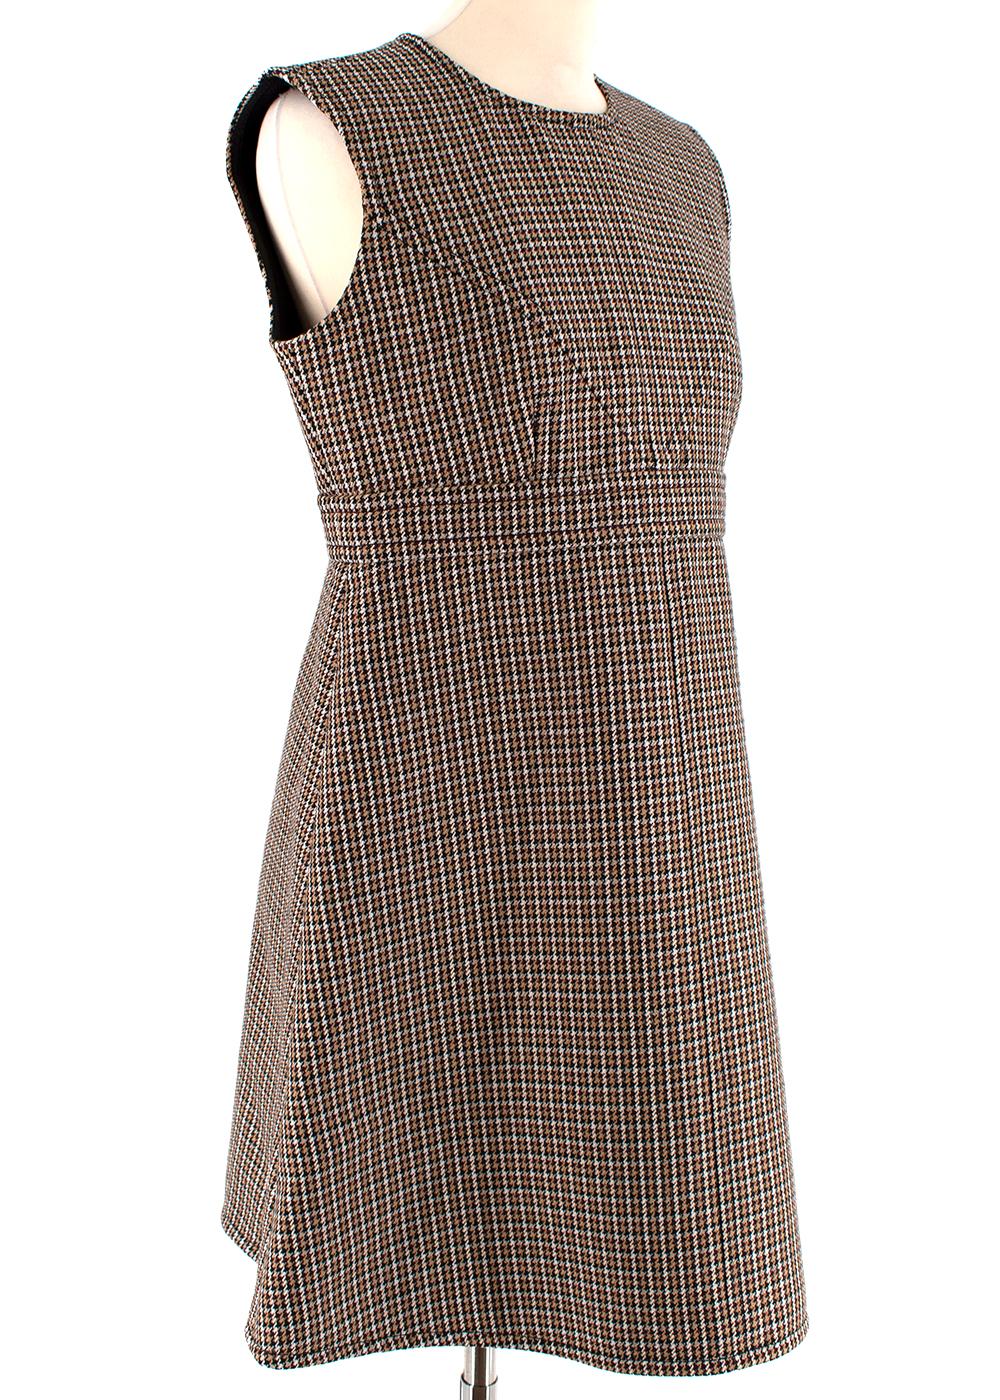 Louis Vuitton Houndstooth Wool Sleeveless Dress

- Warm blend of wool
- Sleeveless dress with a round high neckline
- Accentuated waist with a floaty skirt
- Gunmetal zip hardware down the back of the dress
- Black top stitching
- V shaped panels on